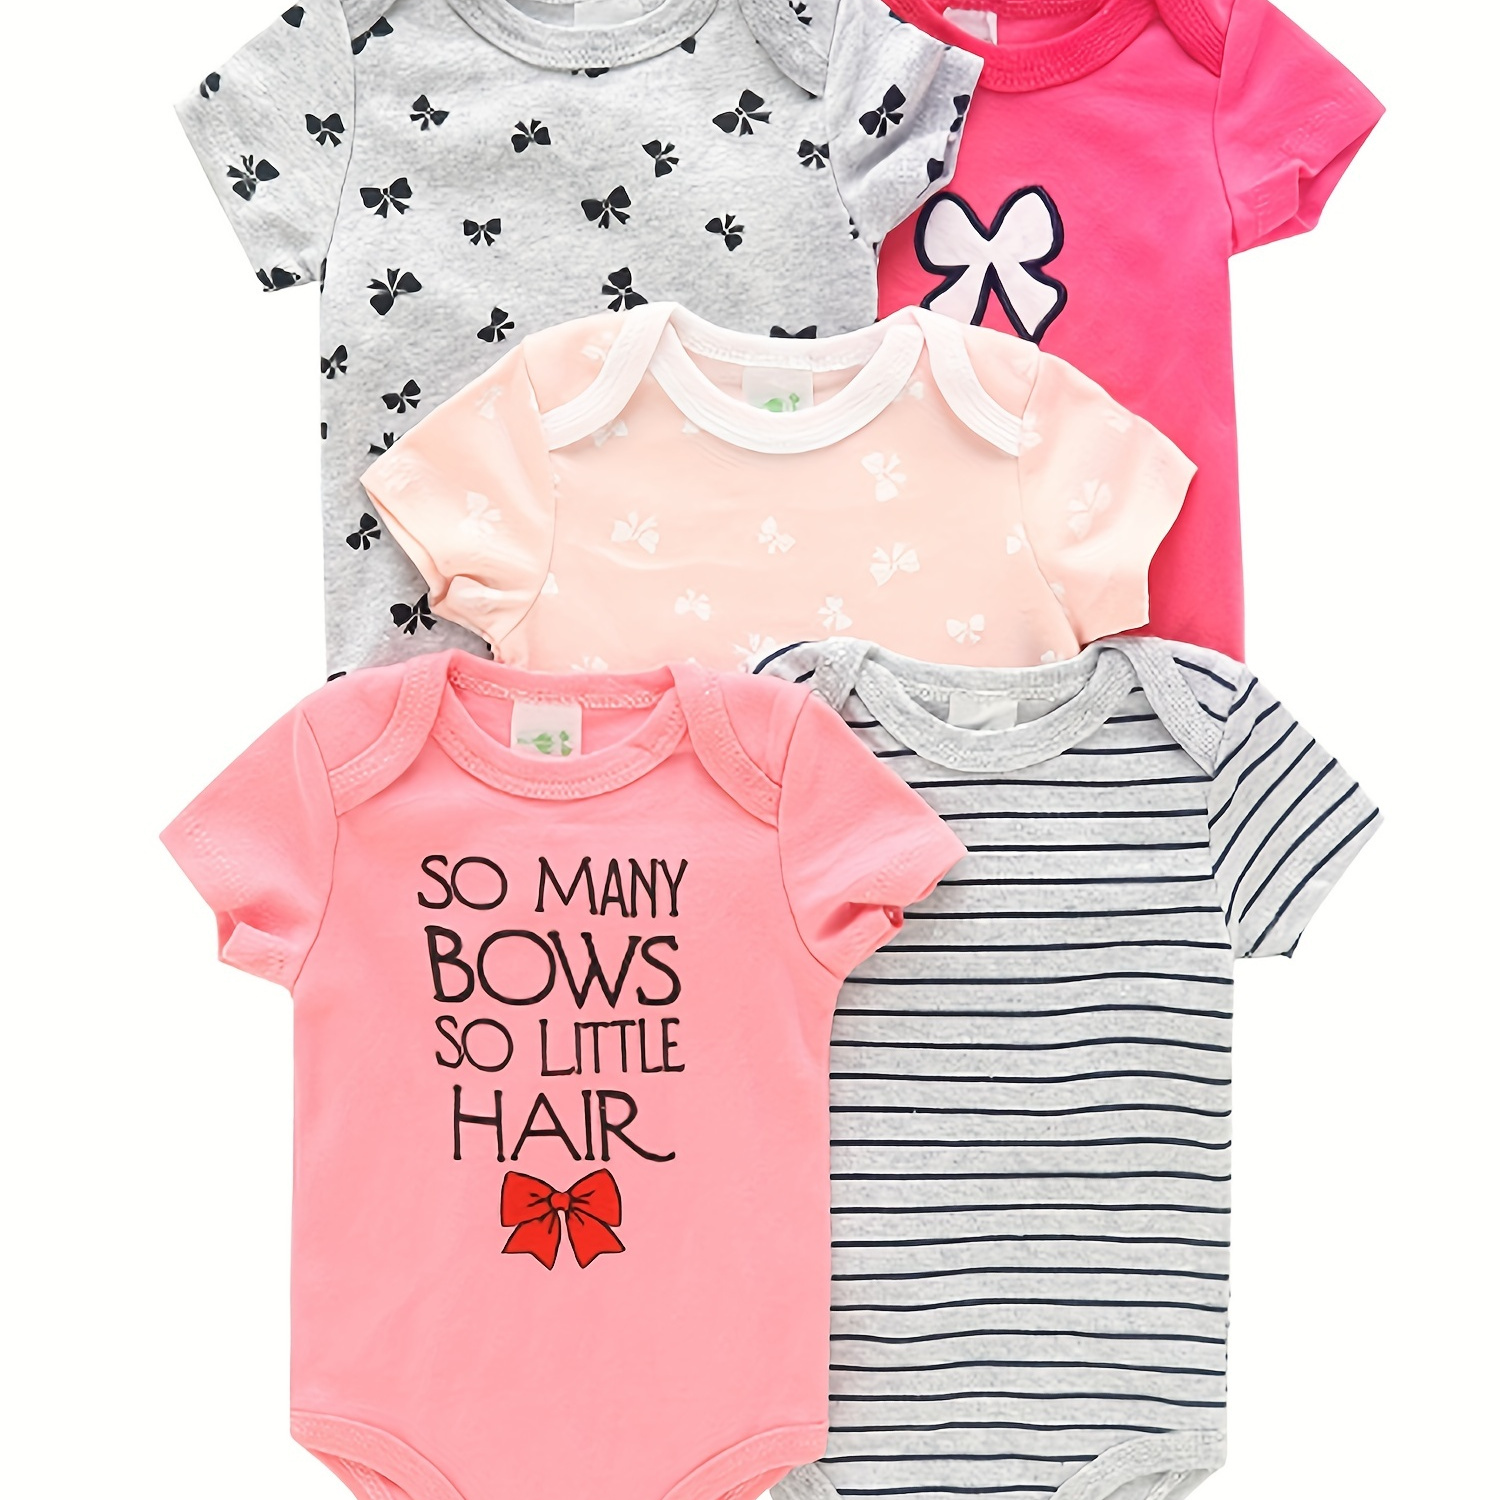 

5pcs Baby Girl's Cute Short Sleeve Round Neck Onesies Clothing With Assorted Designs